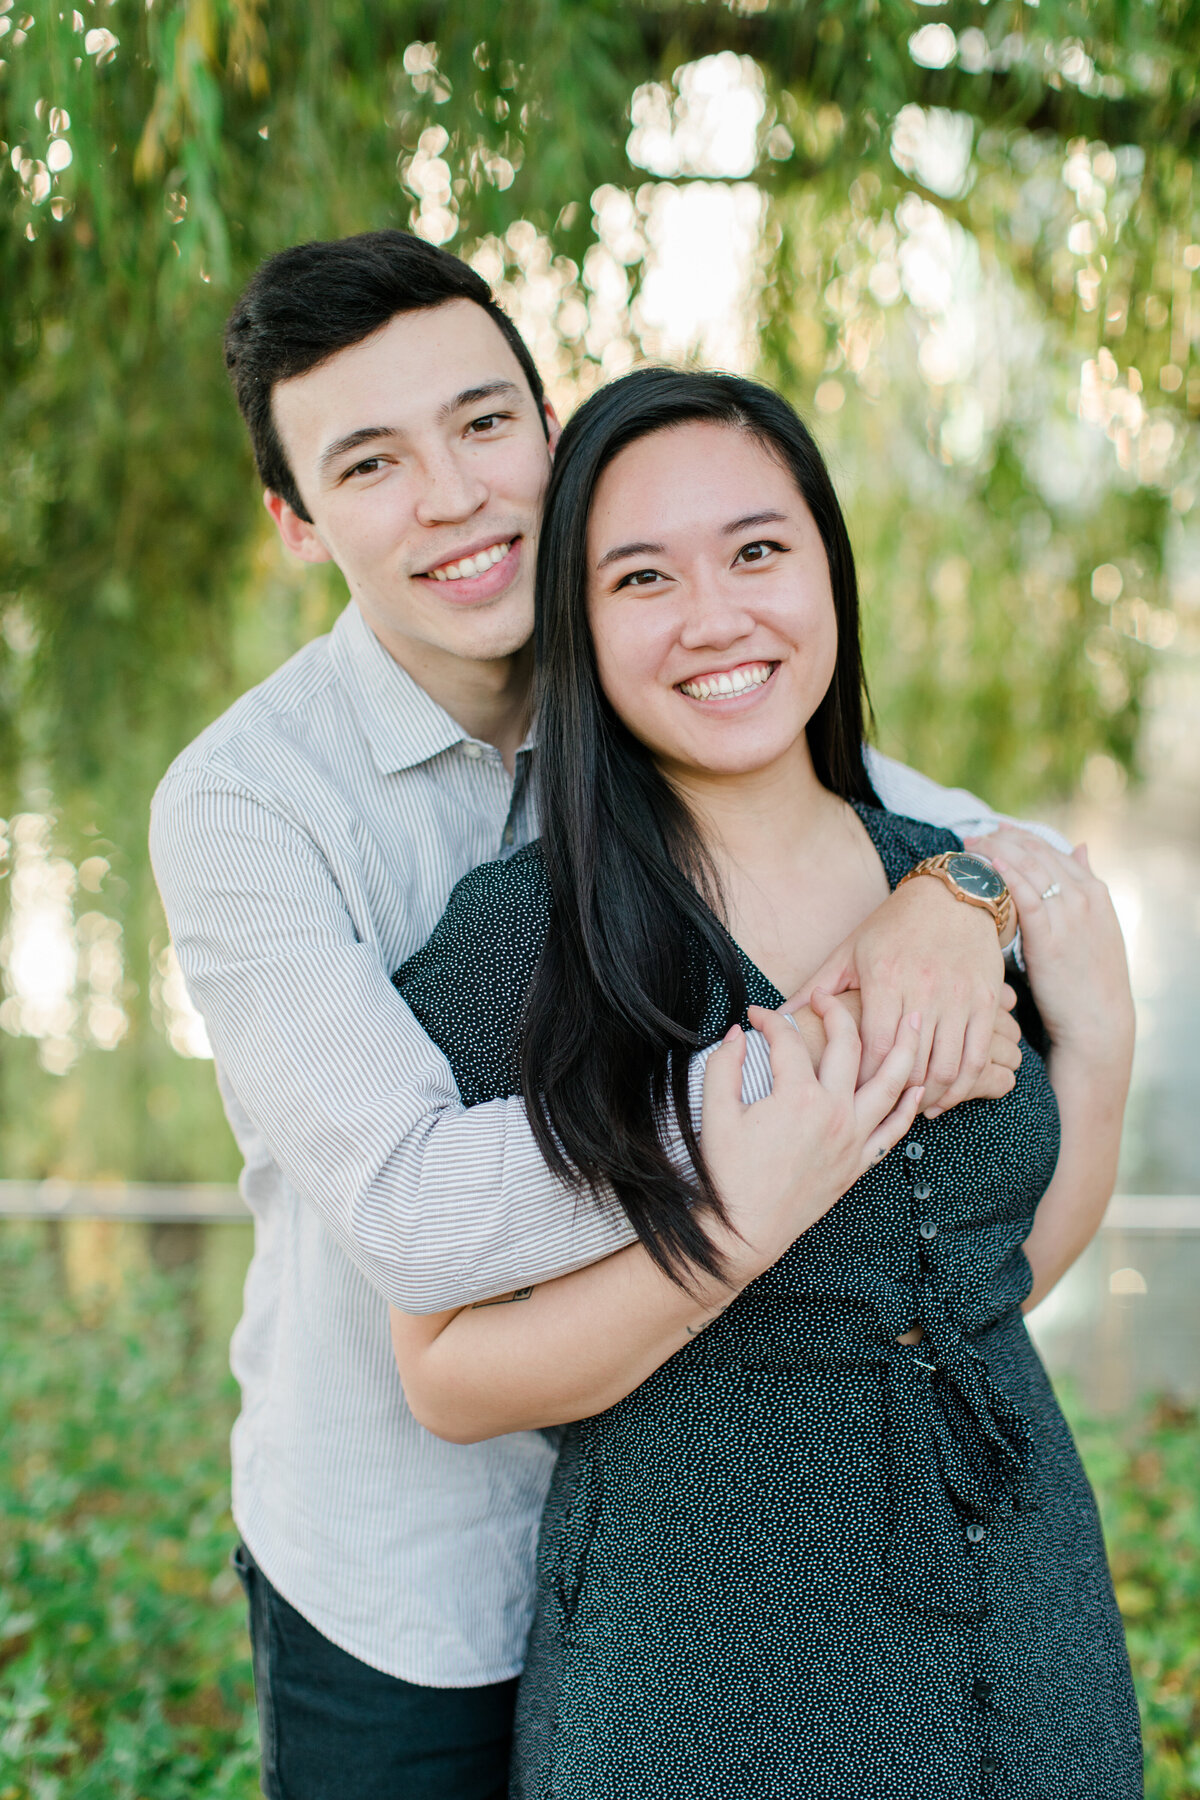 Becky_Collin_Navy_Yards_Park_The_Wharf_Washington_DC_Fall_Engagement_Session_AngelikaJohnsPhotography-7794